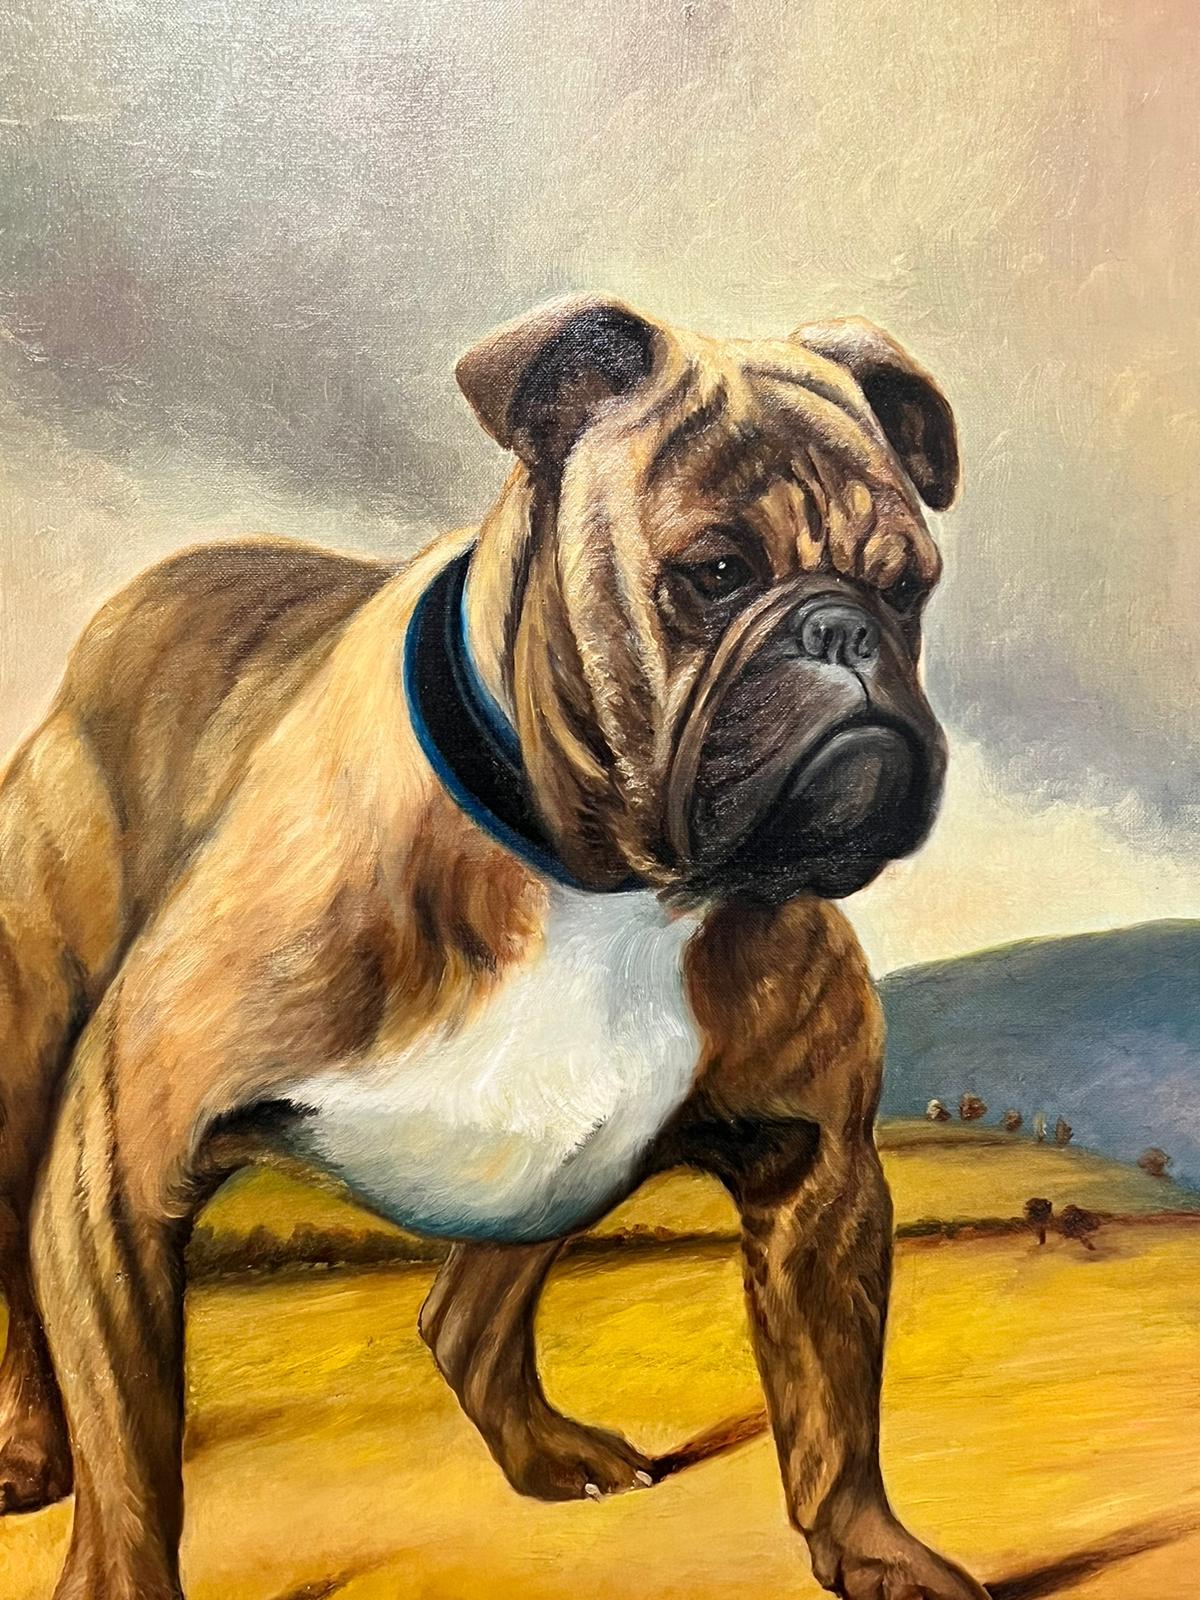 Bulldog In A Landscape
J White (British 19th/20th Century)
oil on canvas, framed
signed and dated 1908
framed: 32 x 25 inches
canvas: 27 x 20 inches
provenance: private collection, Scotland
condition: very good and sound condition
